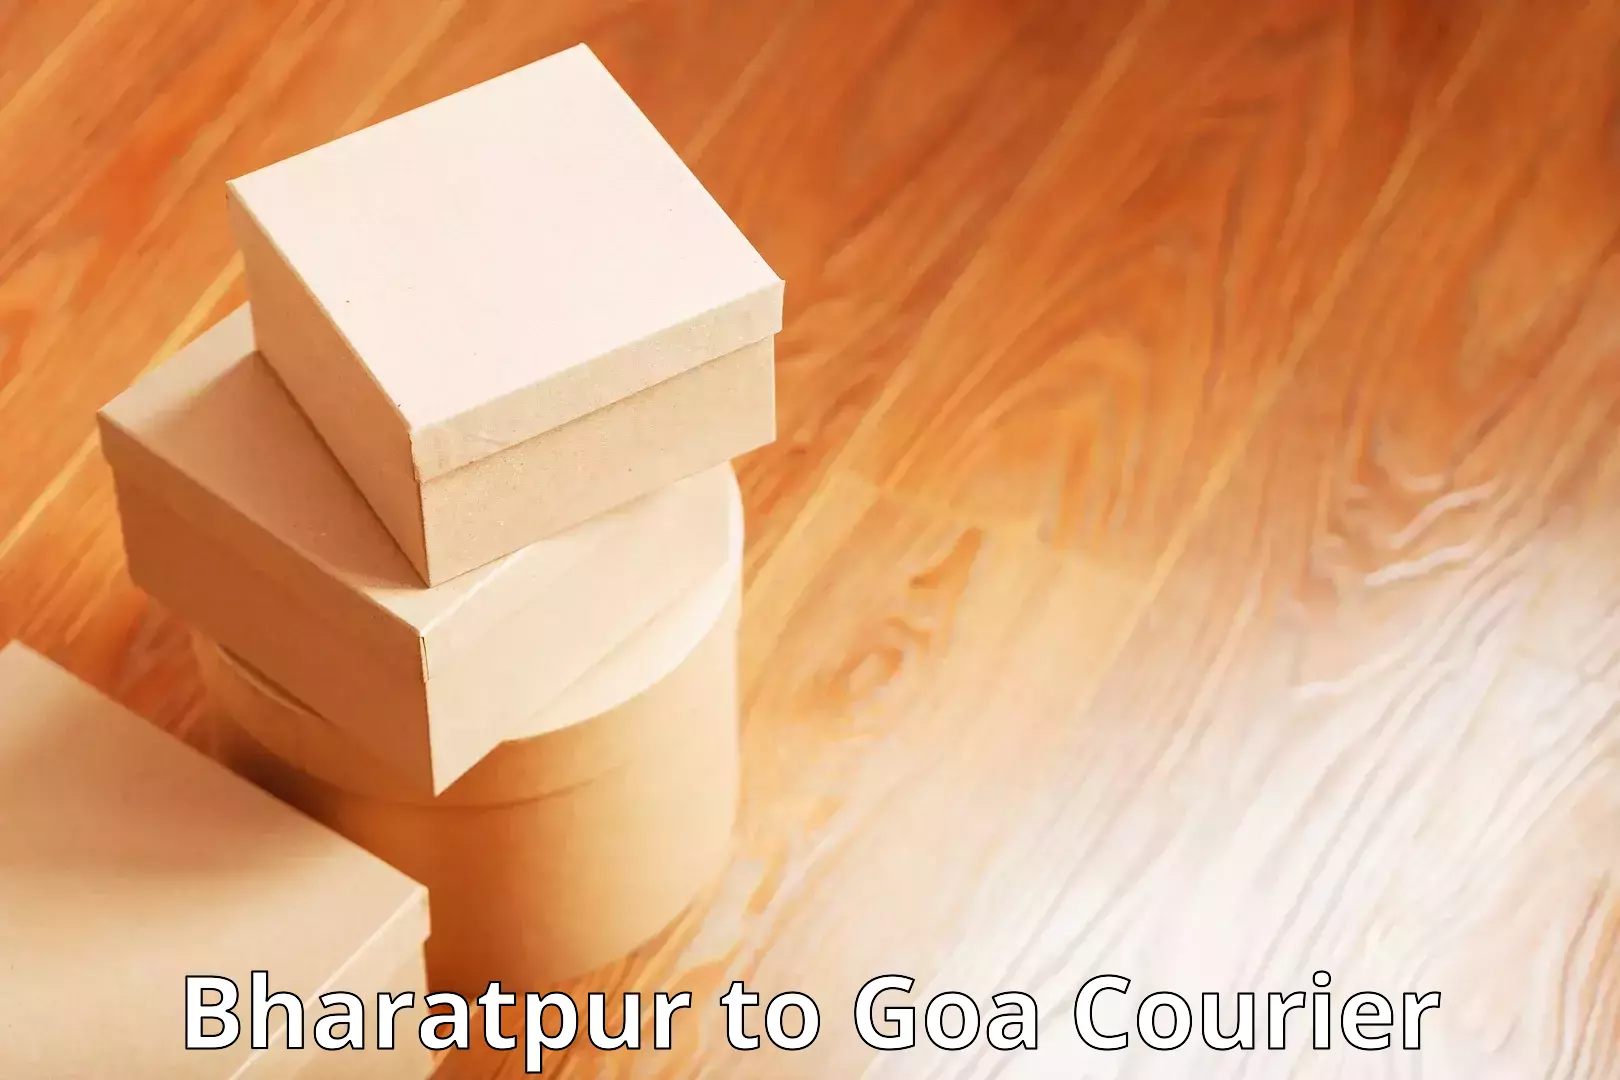 Reliable courier service Bharatpur to Goa